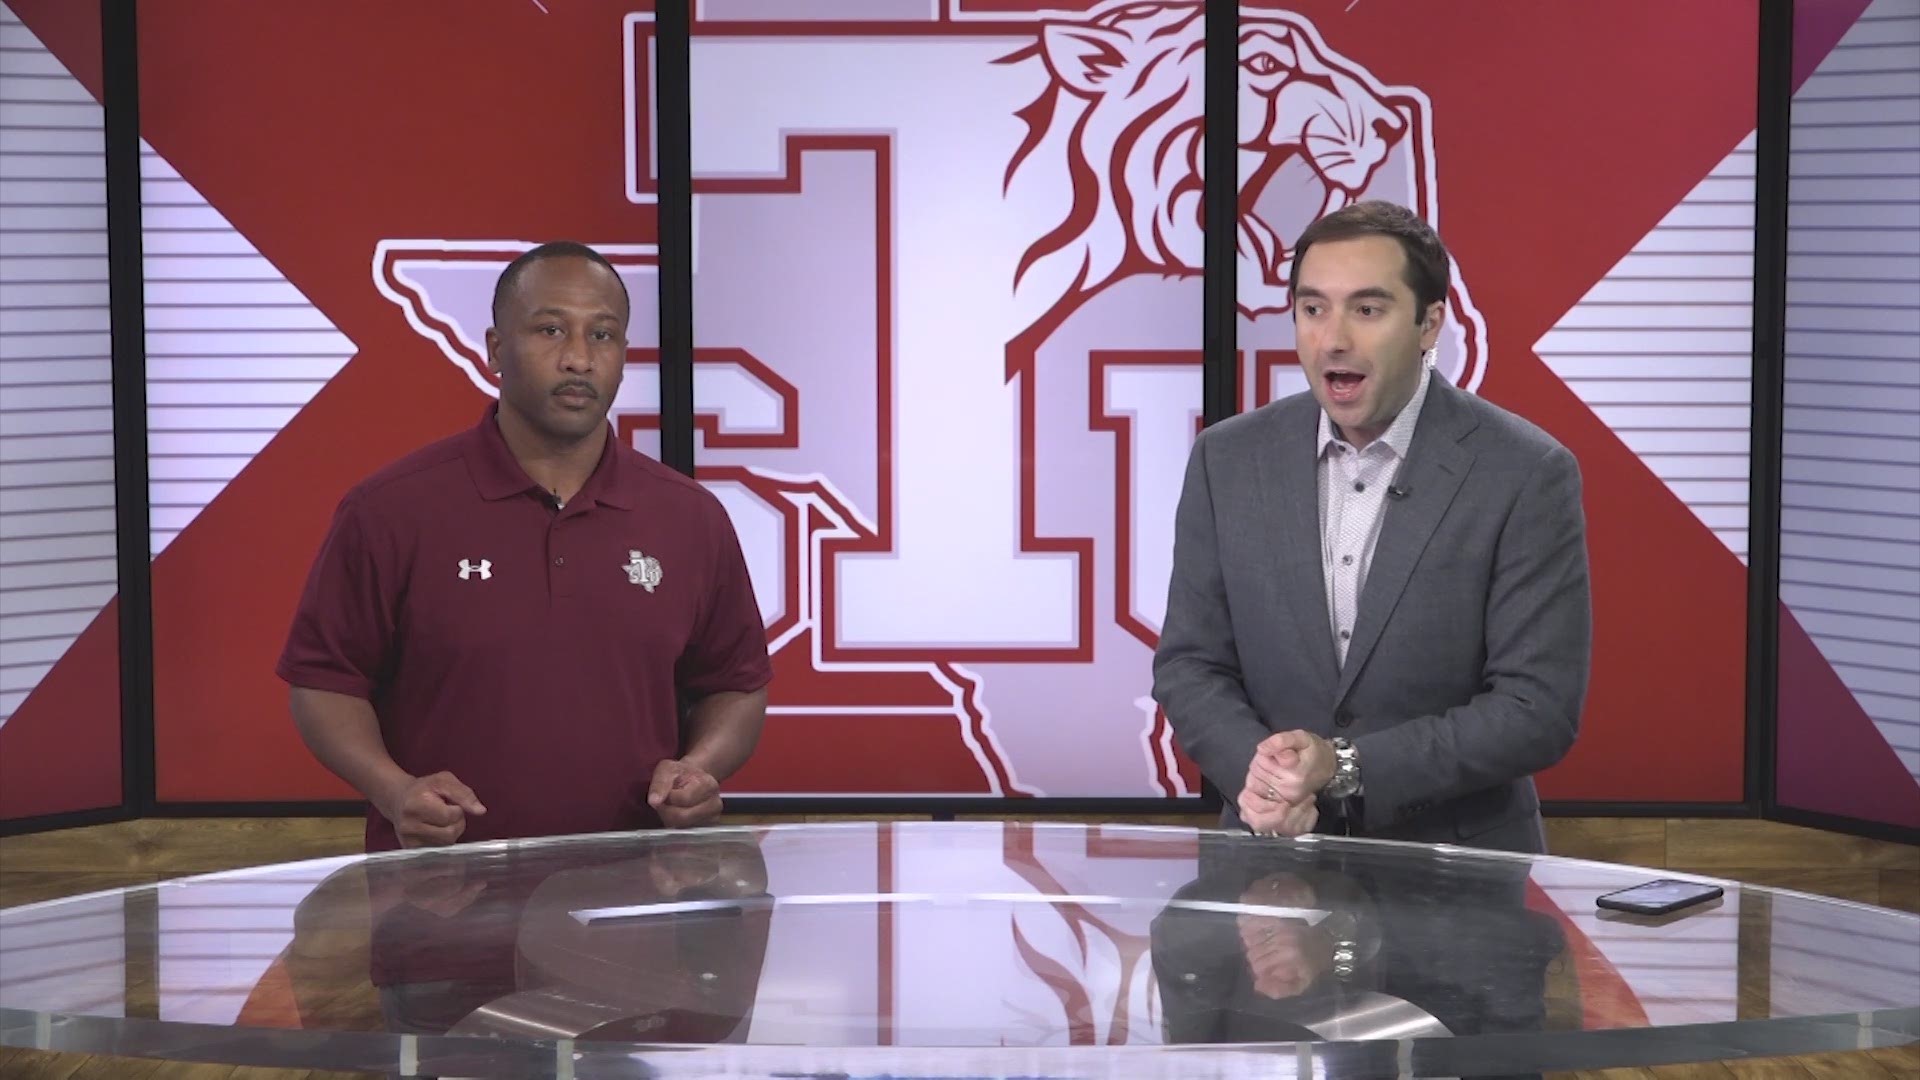 KHOU 11 Sports reporter Daniel Gotera catches up with new Texas Southern football coach Clarence McKinney to talk about the state of the program and what lies ahead for Tigers football.